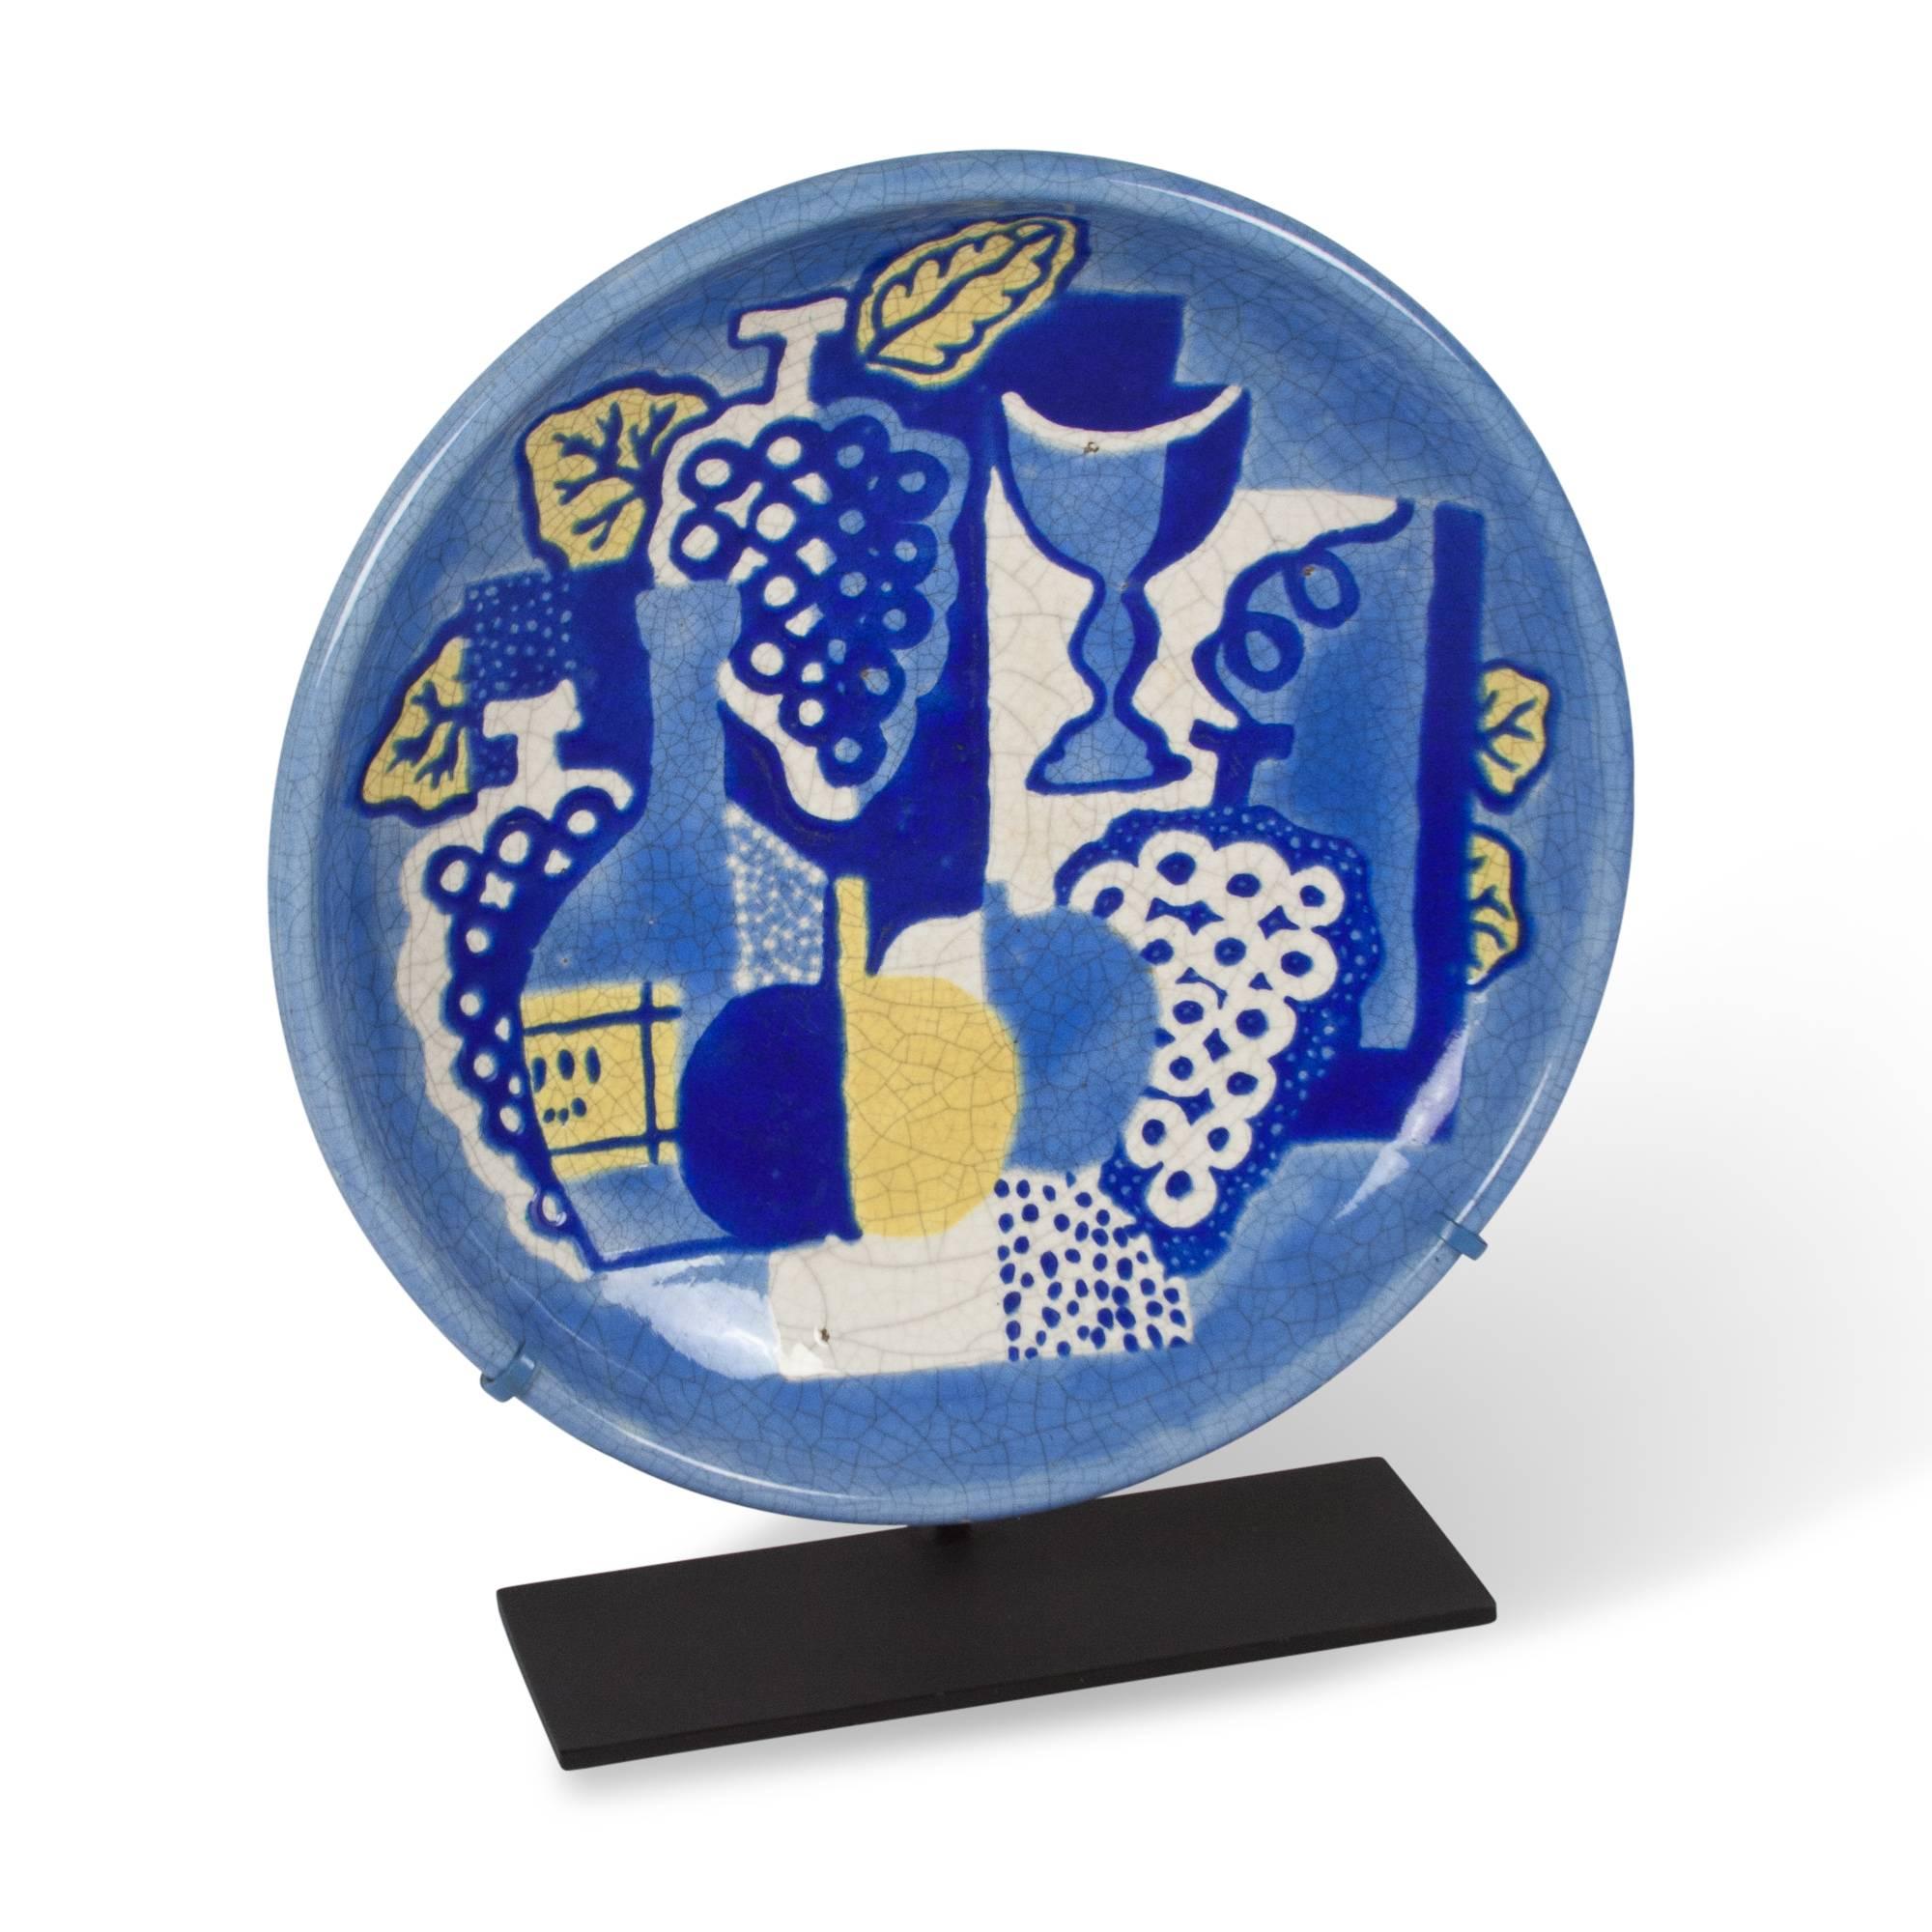 Ceramic charger, decorated with an abstracted cubist style still life against a blue ground, Atelier Primavera and Longwy, French 1930s. On a custom steel stand. Signed to back. Measures; Overall mounted height 17 in, diameter of ceramic 15 in, base